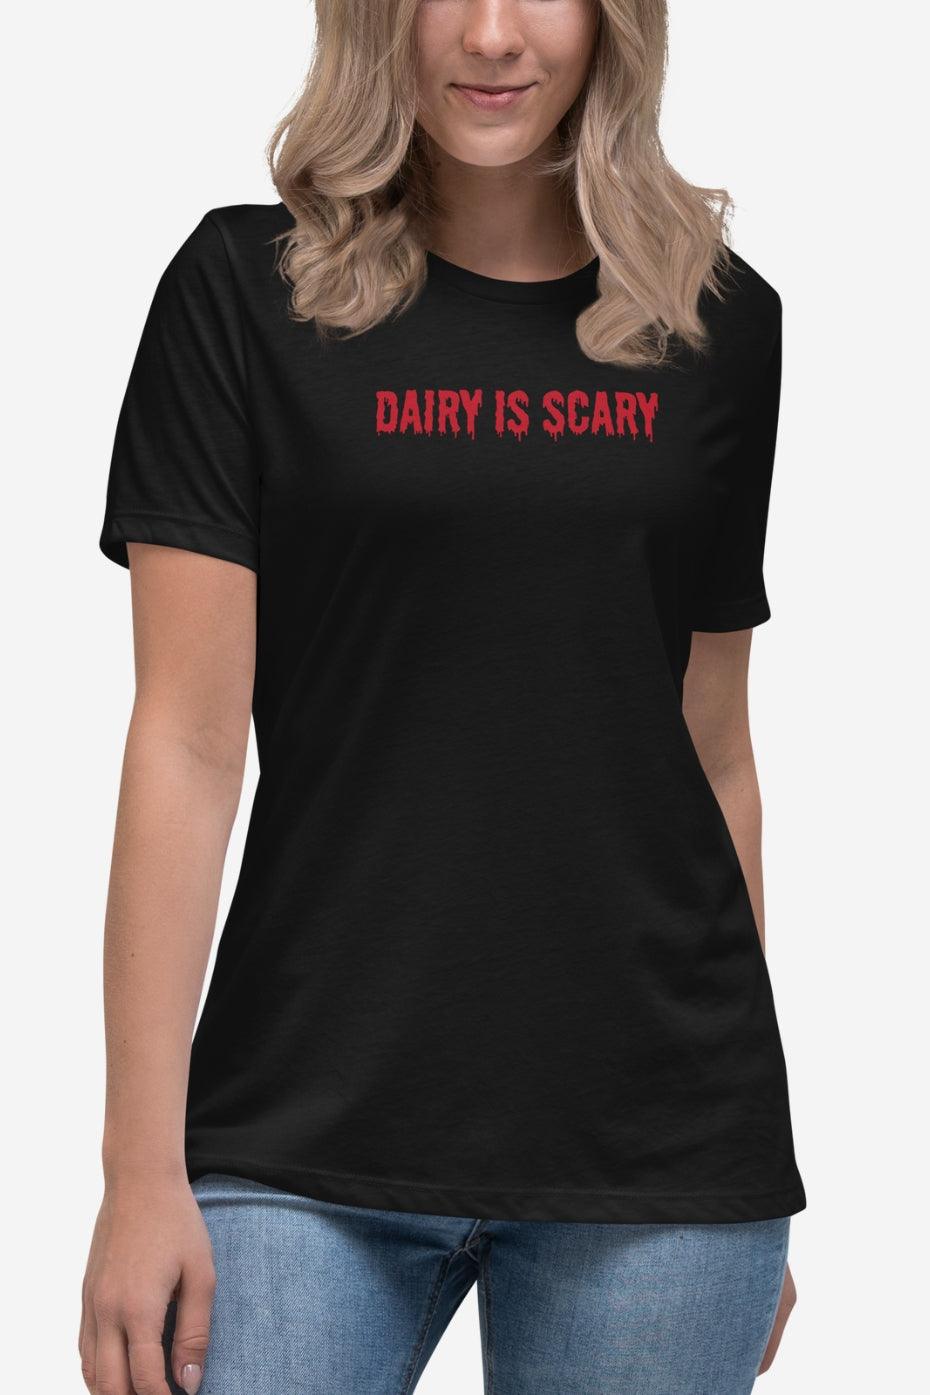 Dairy is Scary Women's Relaxed T-Shirt